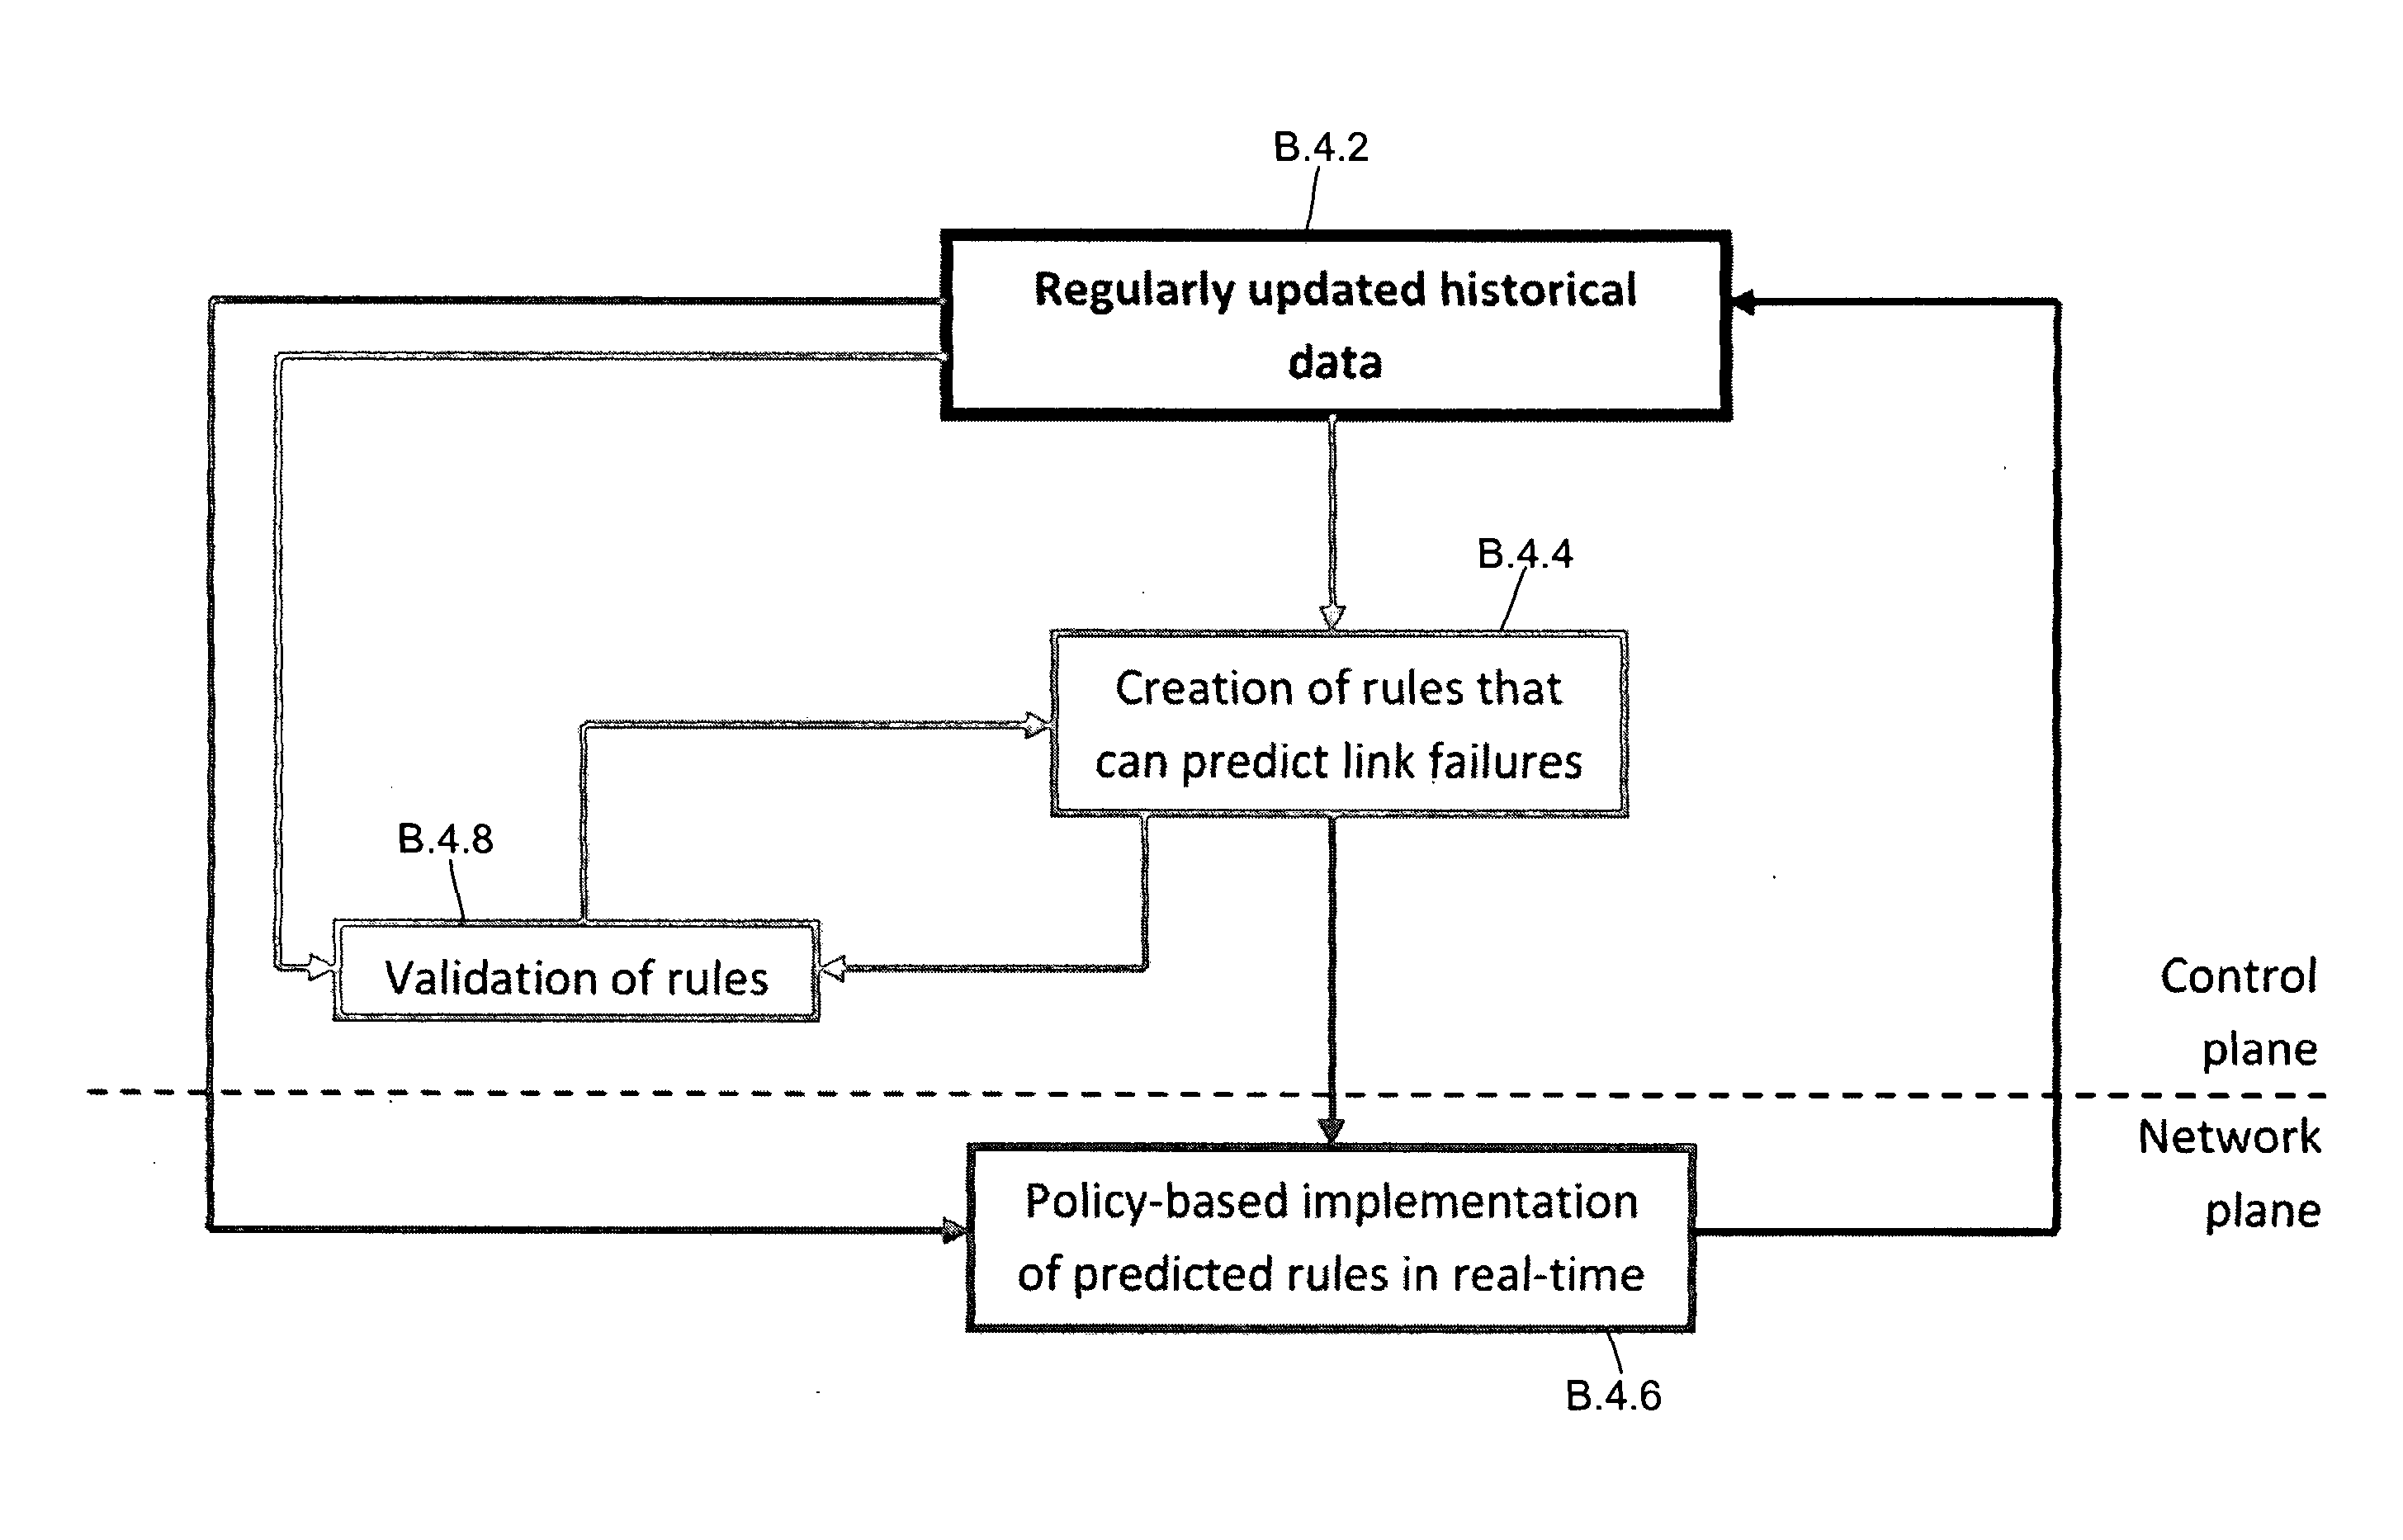 Network routing adaptation based on failure prediction